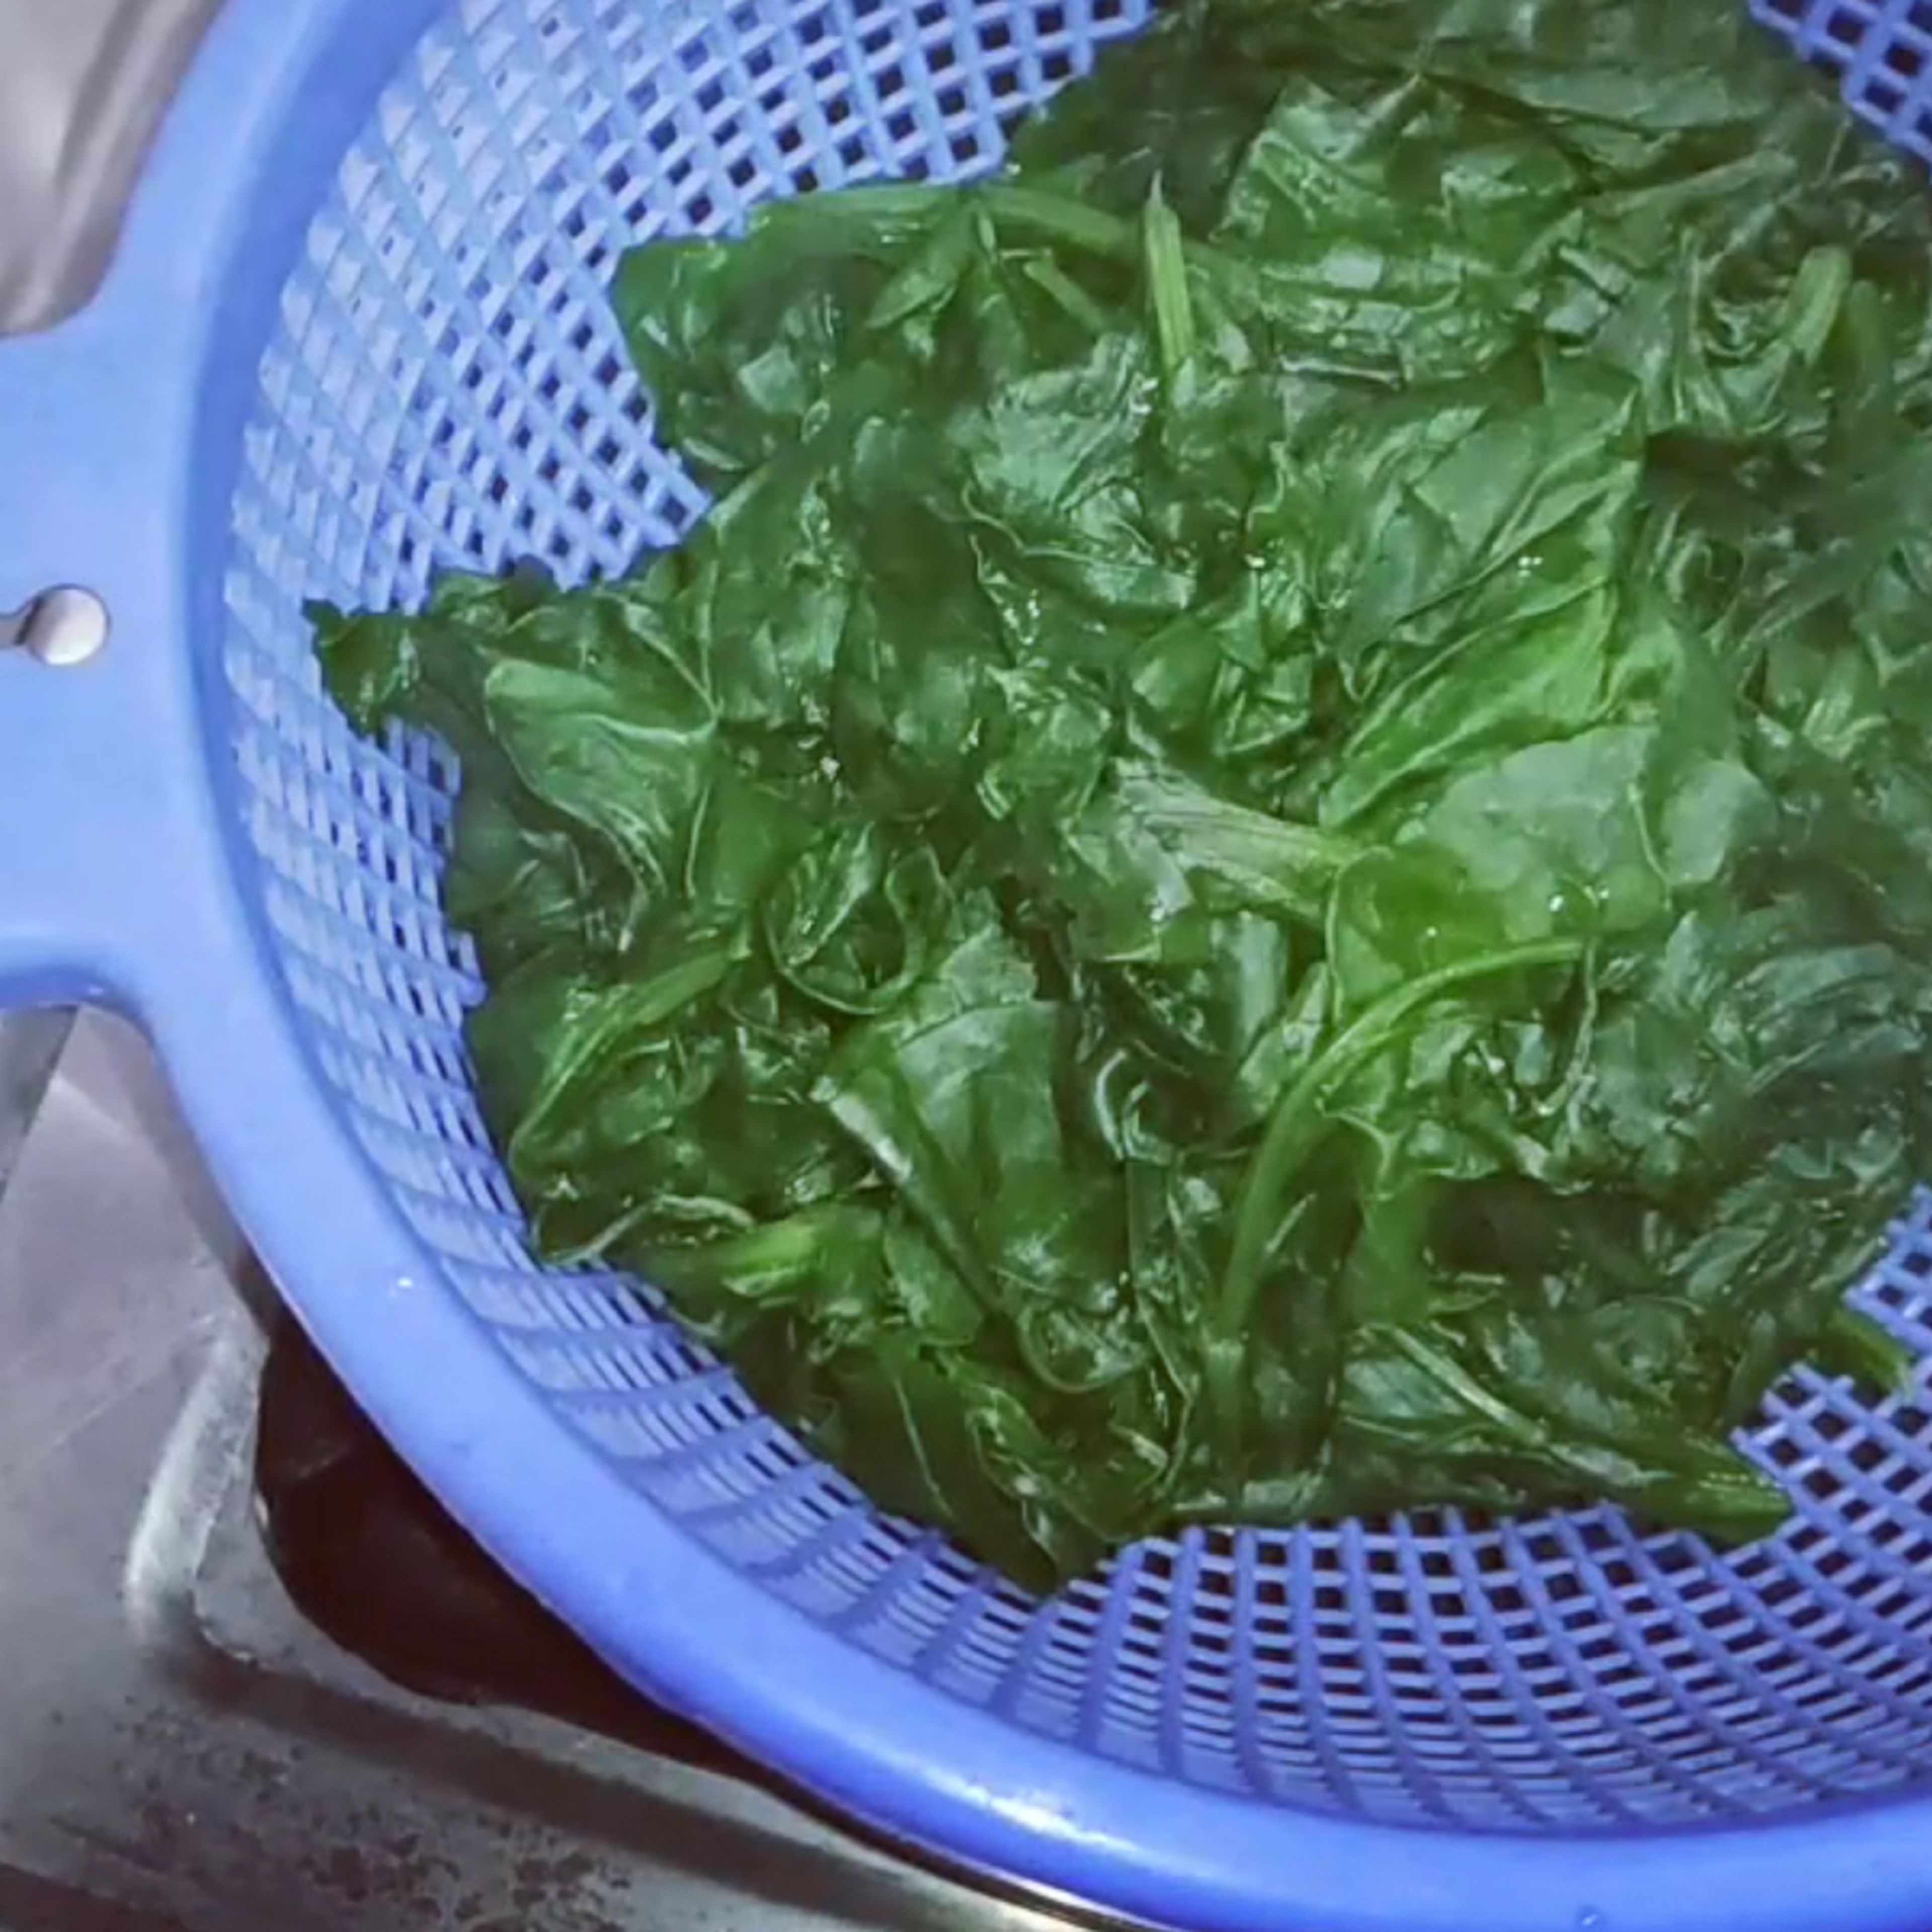 Now bring spinach to boil until it turns smooth. Afterwards, turn off the flame and allow it to get cool. Moreover, with the help of strainer remove the excess water. For spinach puree, grind the spinach, you can add chilles (optional) and some cubes of tofu/paneer to give it creamy texture.